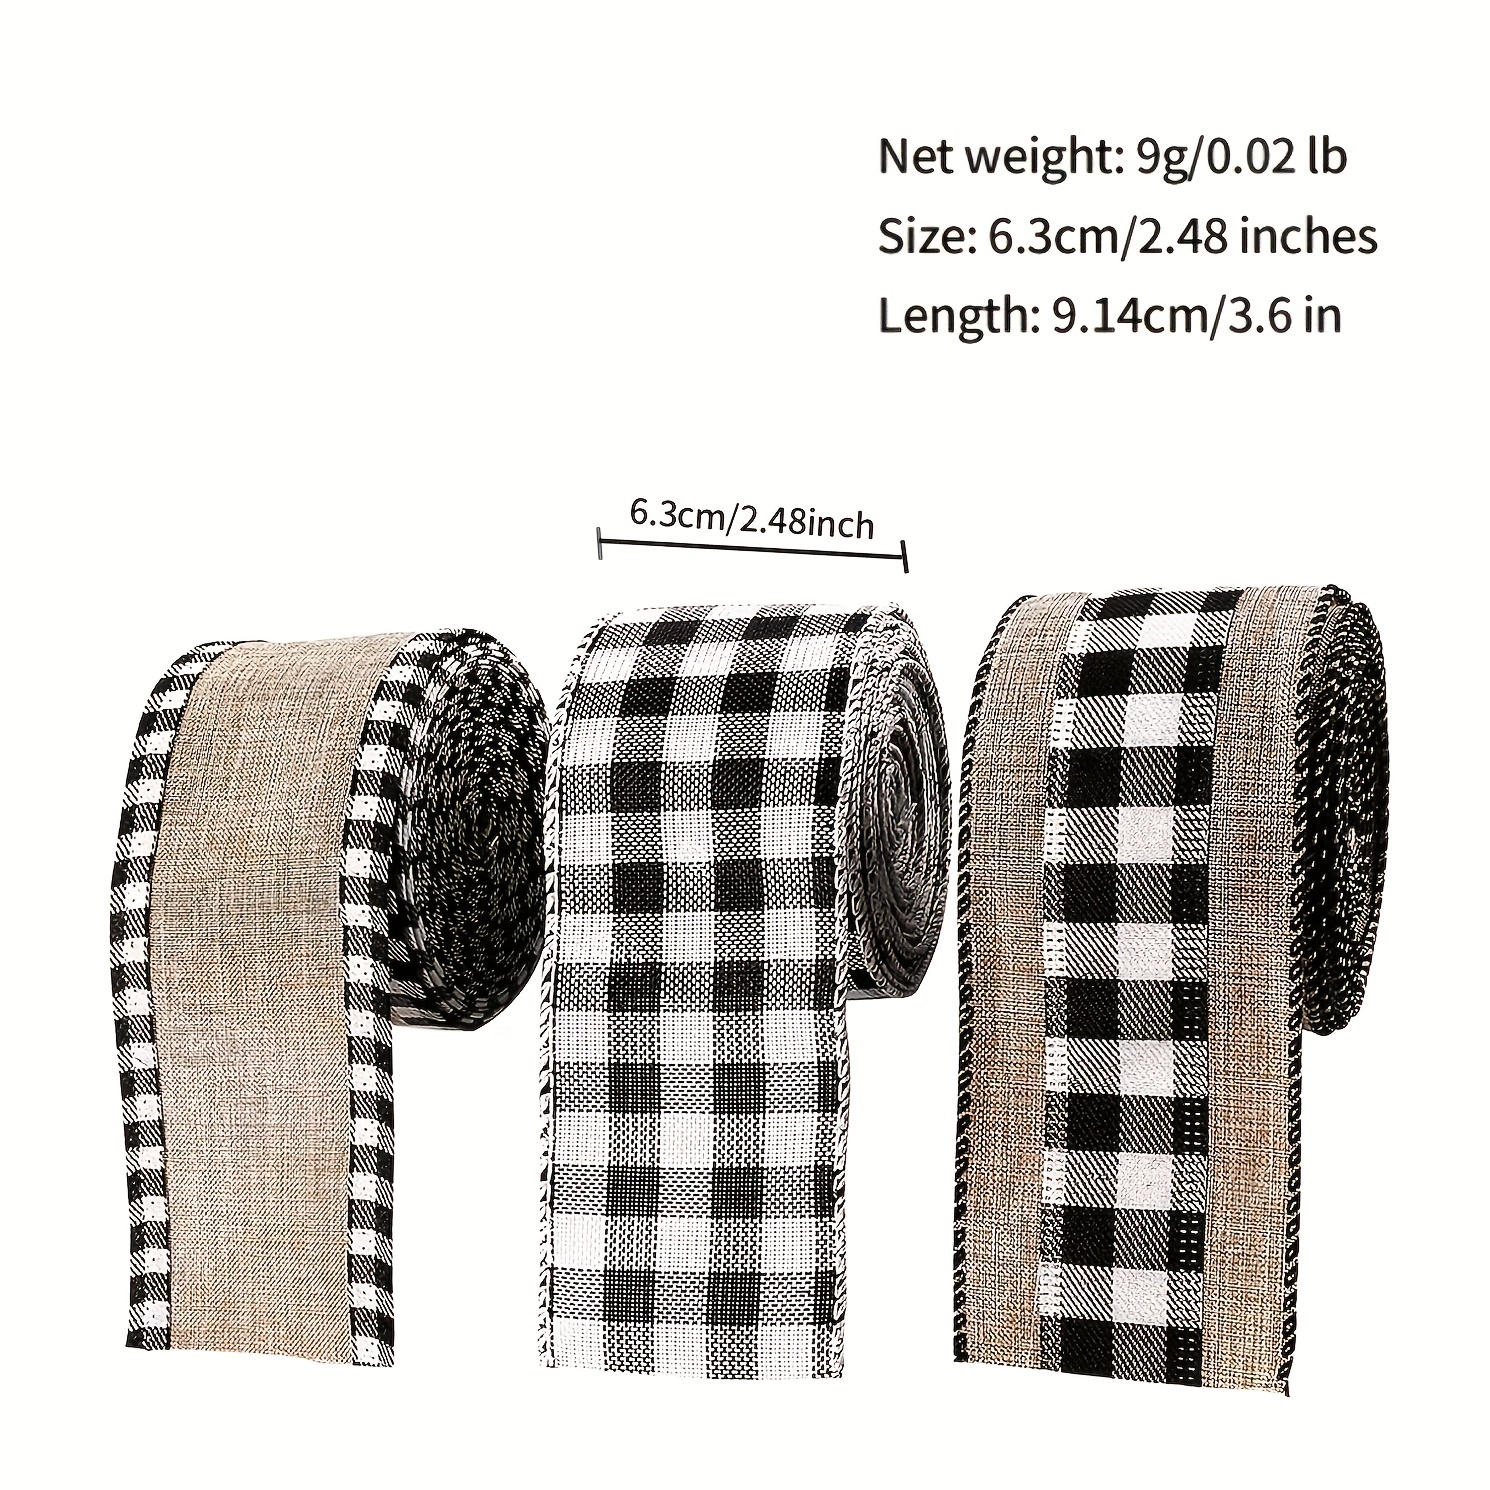 Gingham Check Ribbon Buffalo plaid black and white ideal for gift wrap, hat  bands, tree trim, quilting, wreaths, on 1.5 White grosgrain